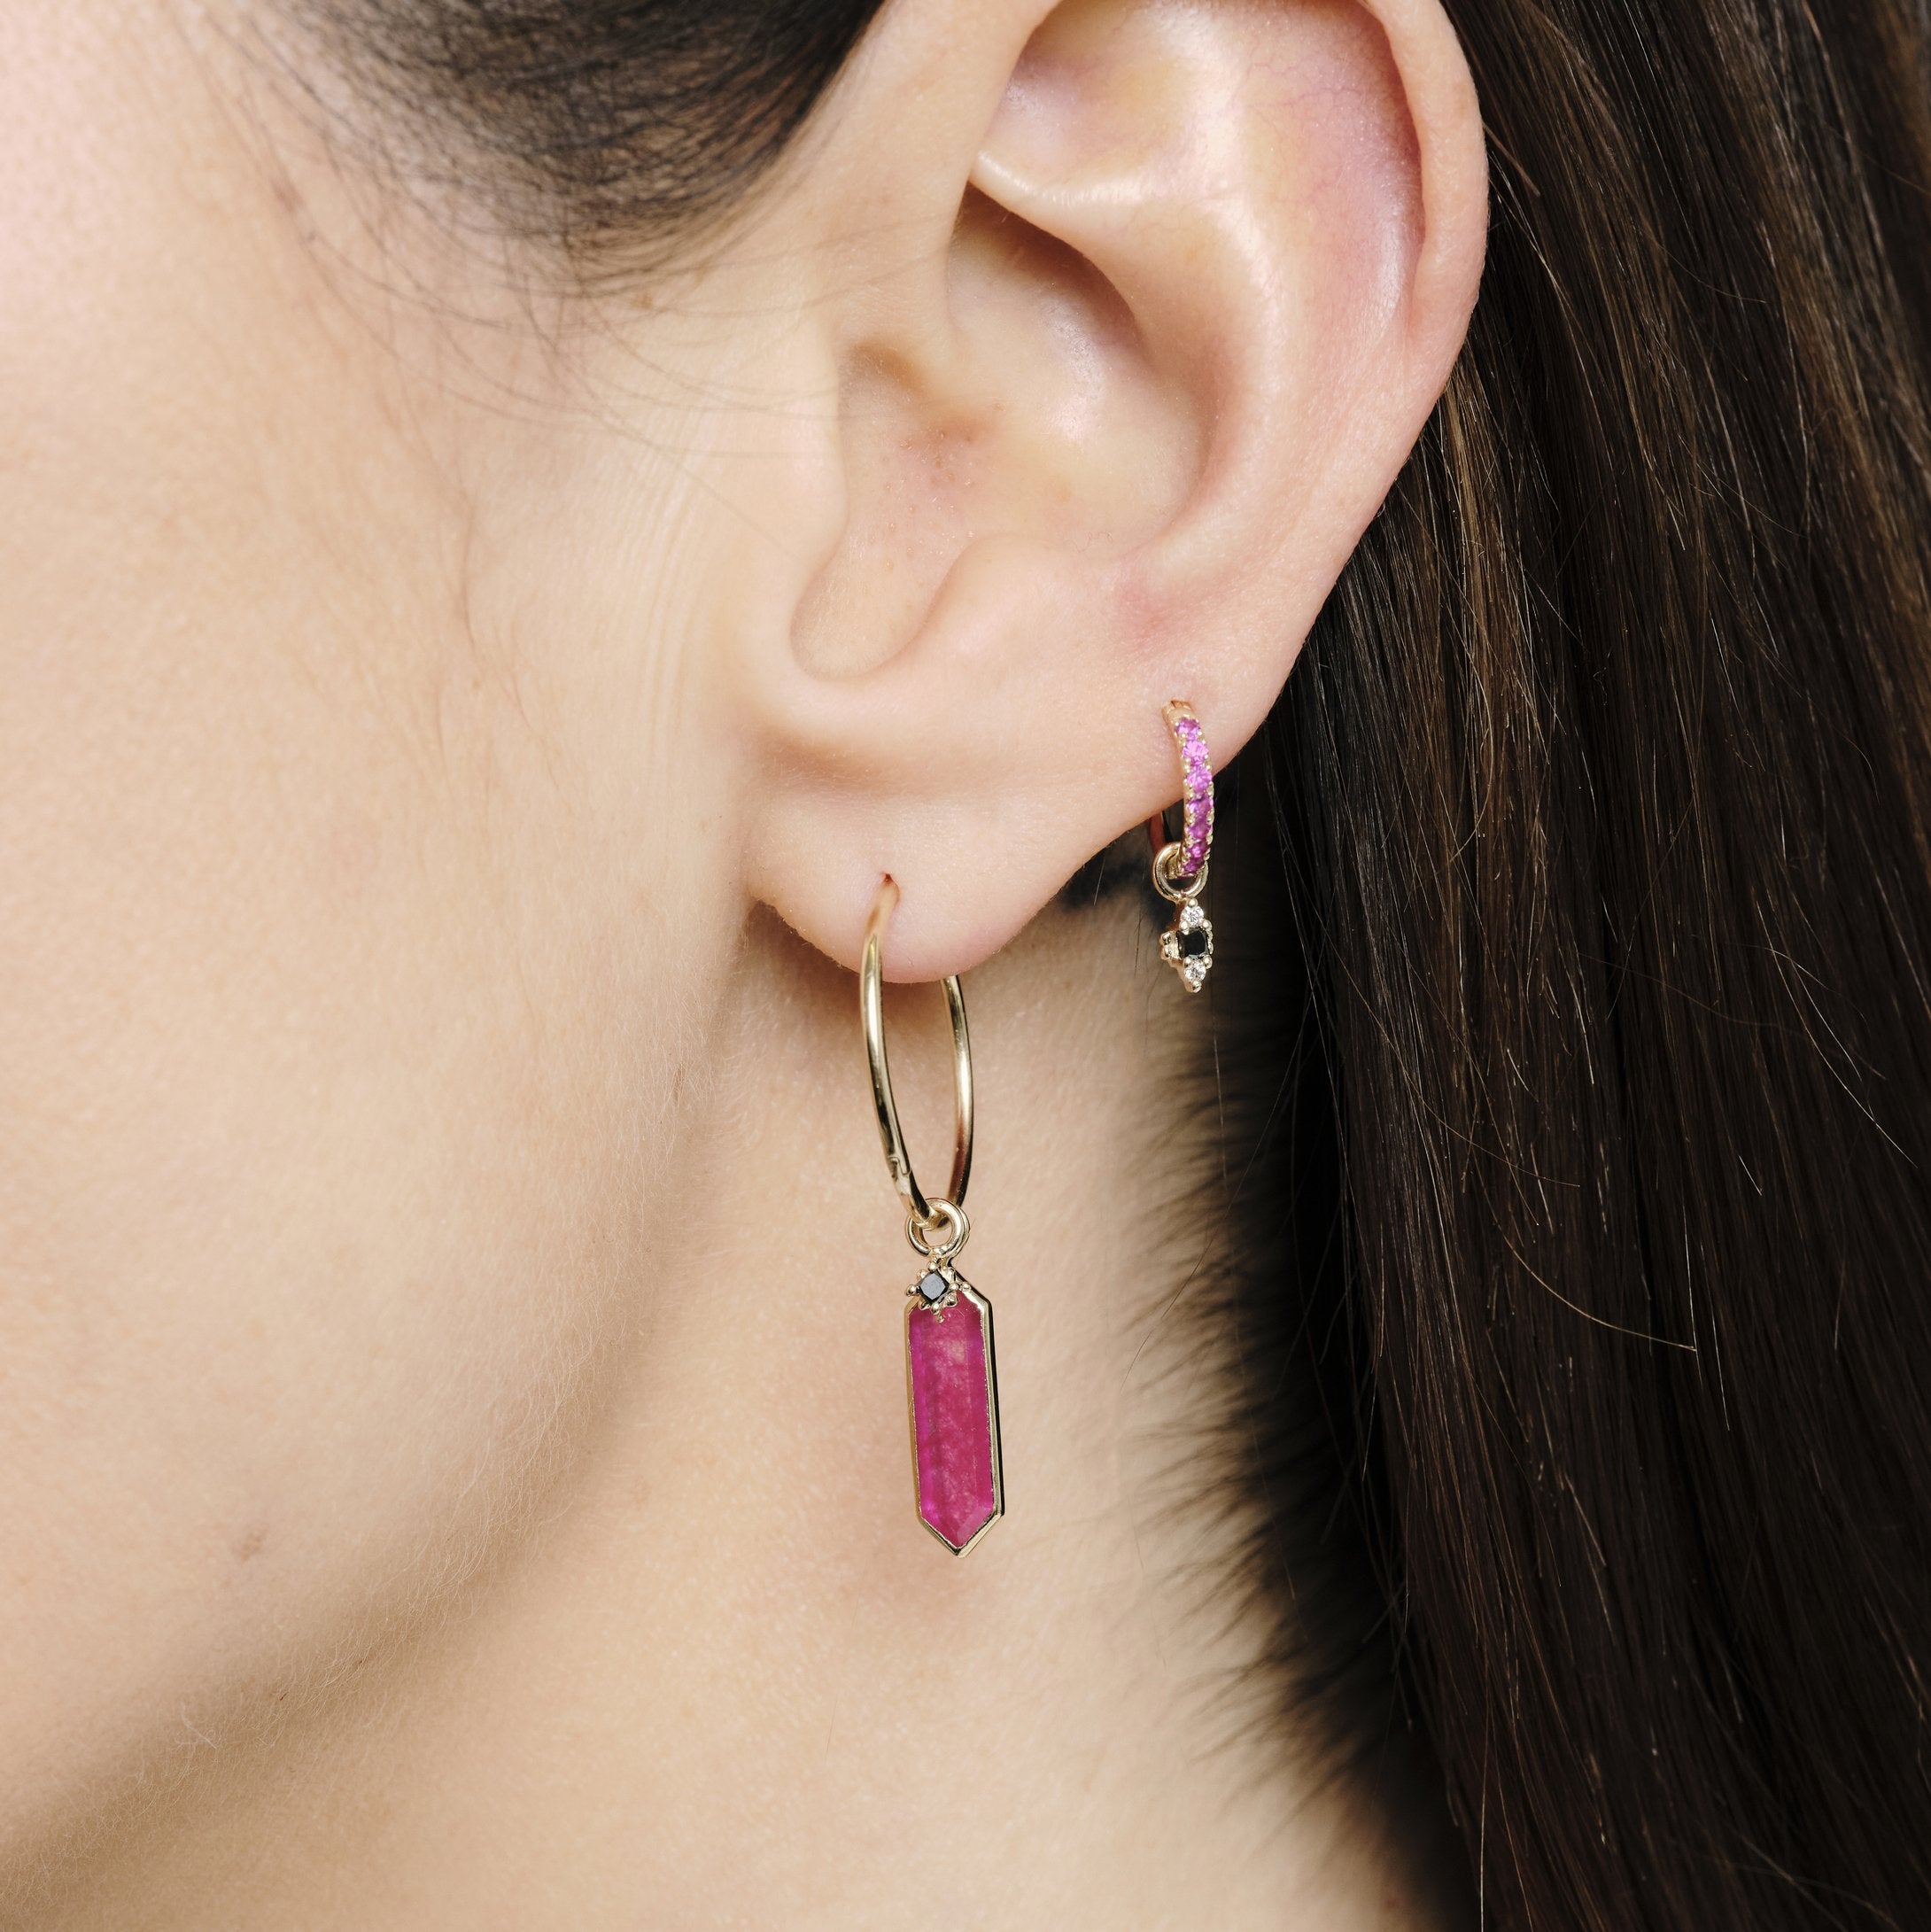 Métier by tomfoolery Ruby Hexa and Dala Ear Story. 9ct Yellow Gold. White and Black Diamonds. Rubies. Ruby Quartz.